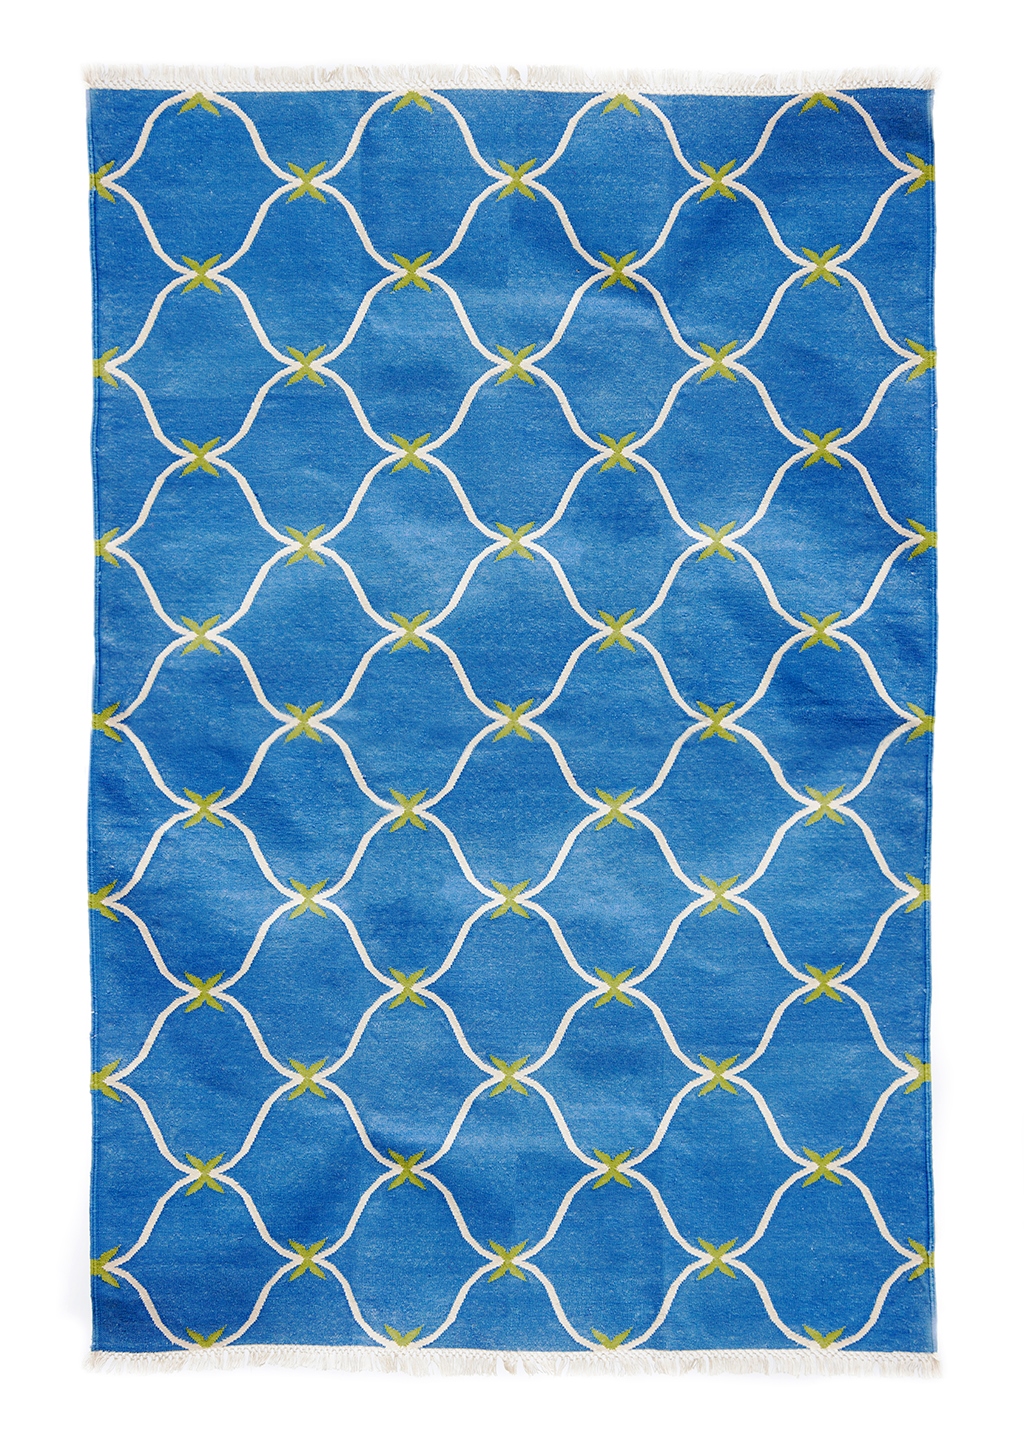 JANJEER-sea blue, lime green & white Dhurrie (rug) - Mahout Lifestyle